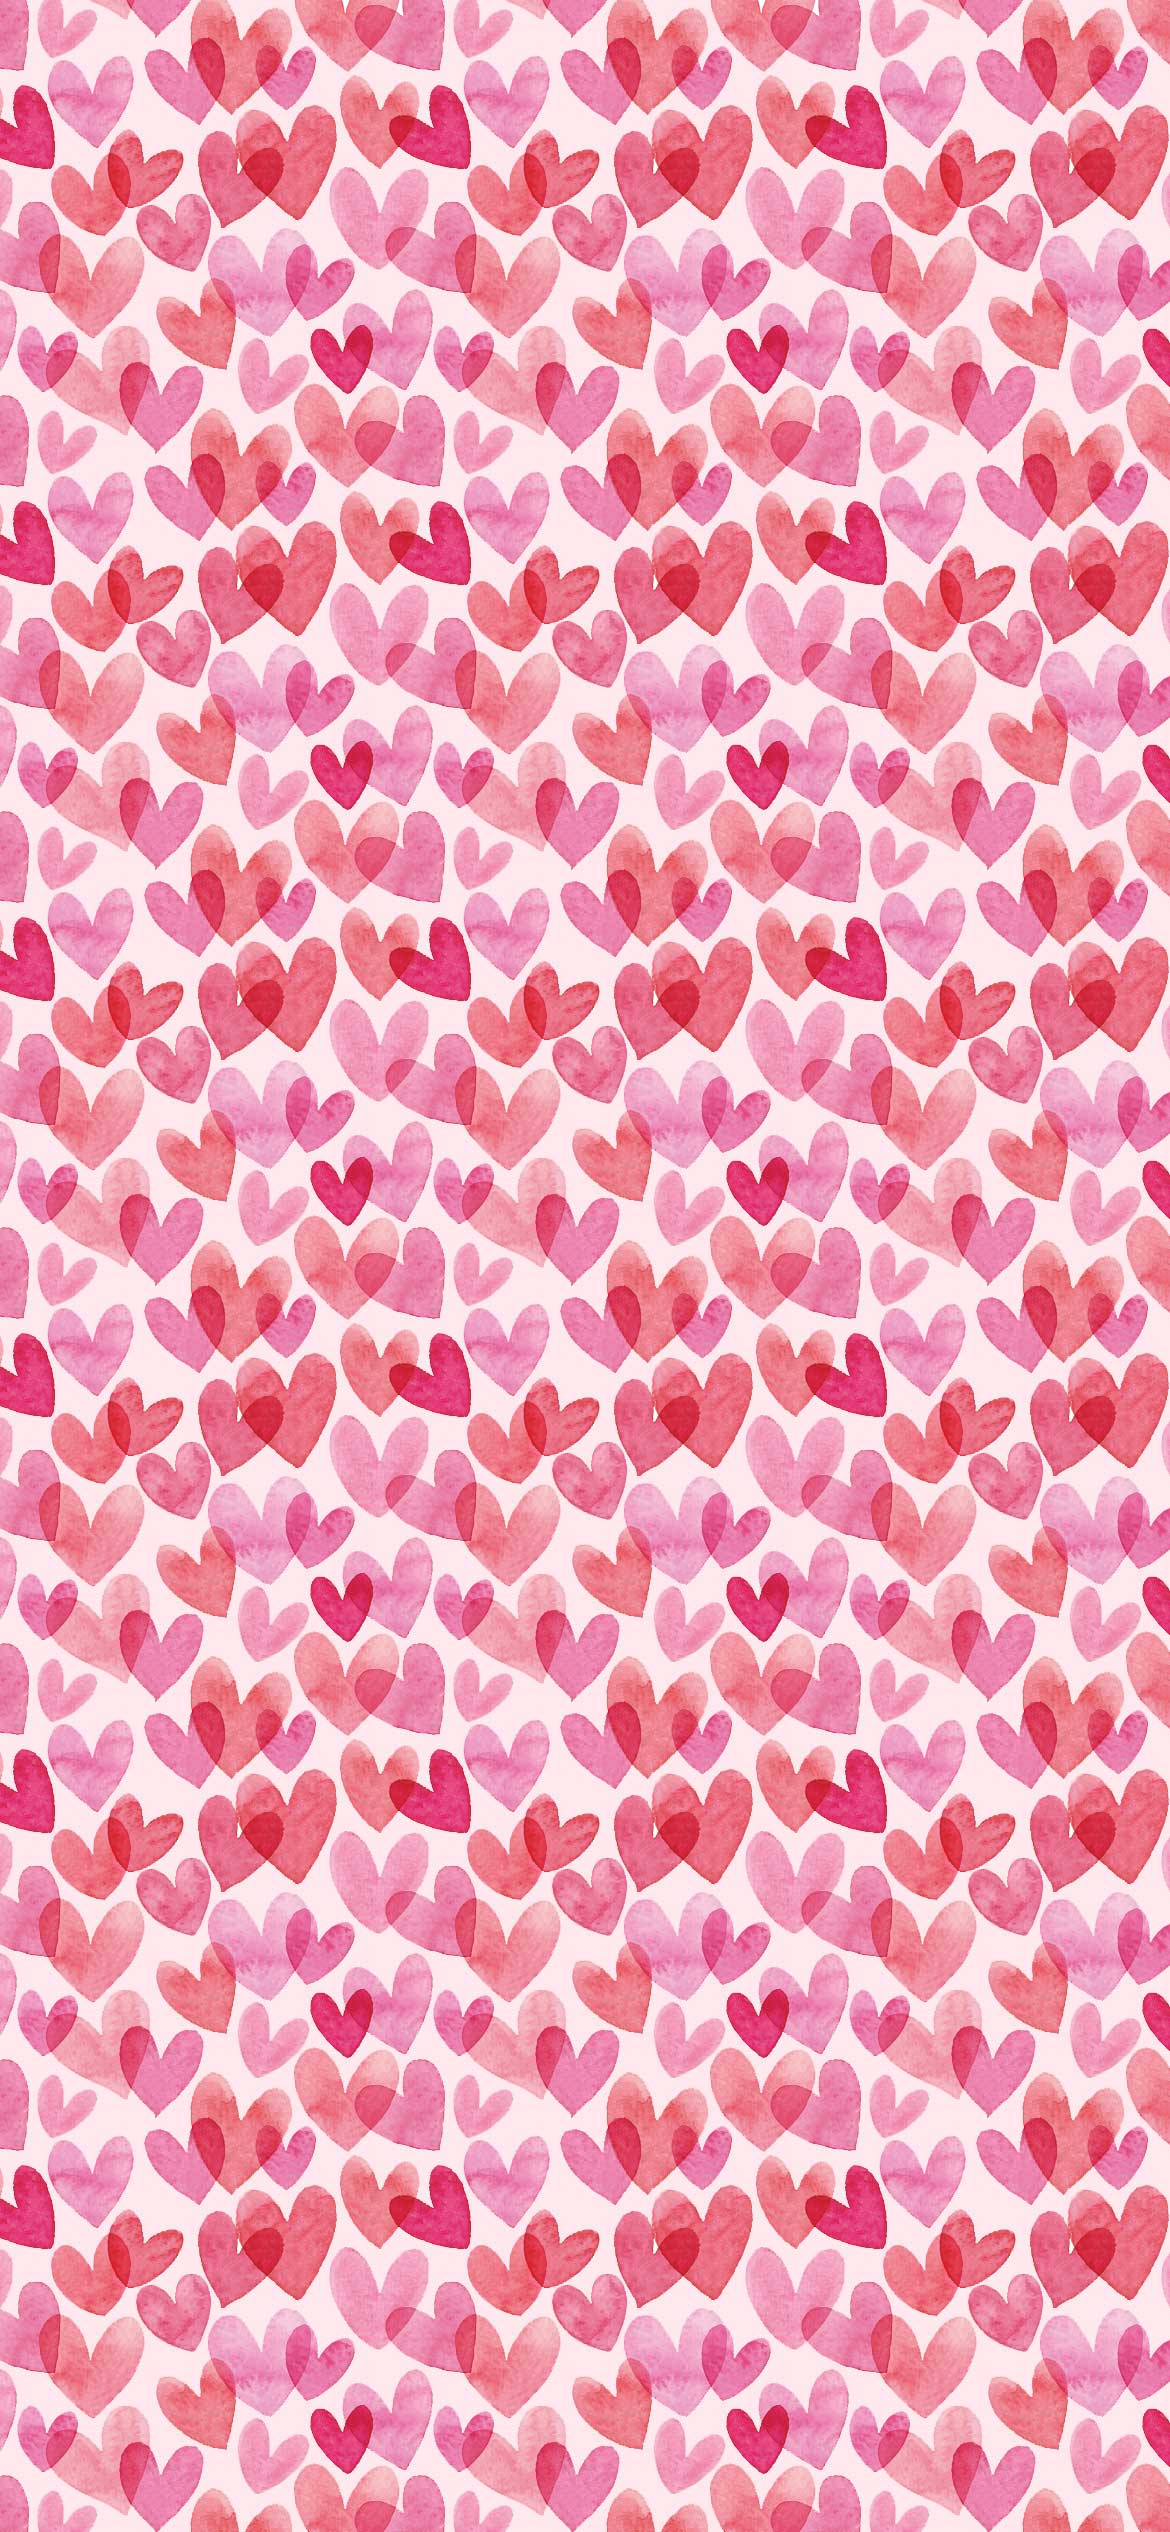 A pink and white pattern with hearts - Heart, pink heart